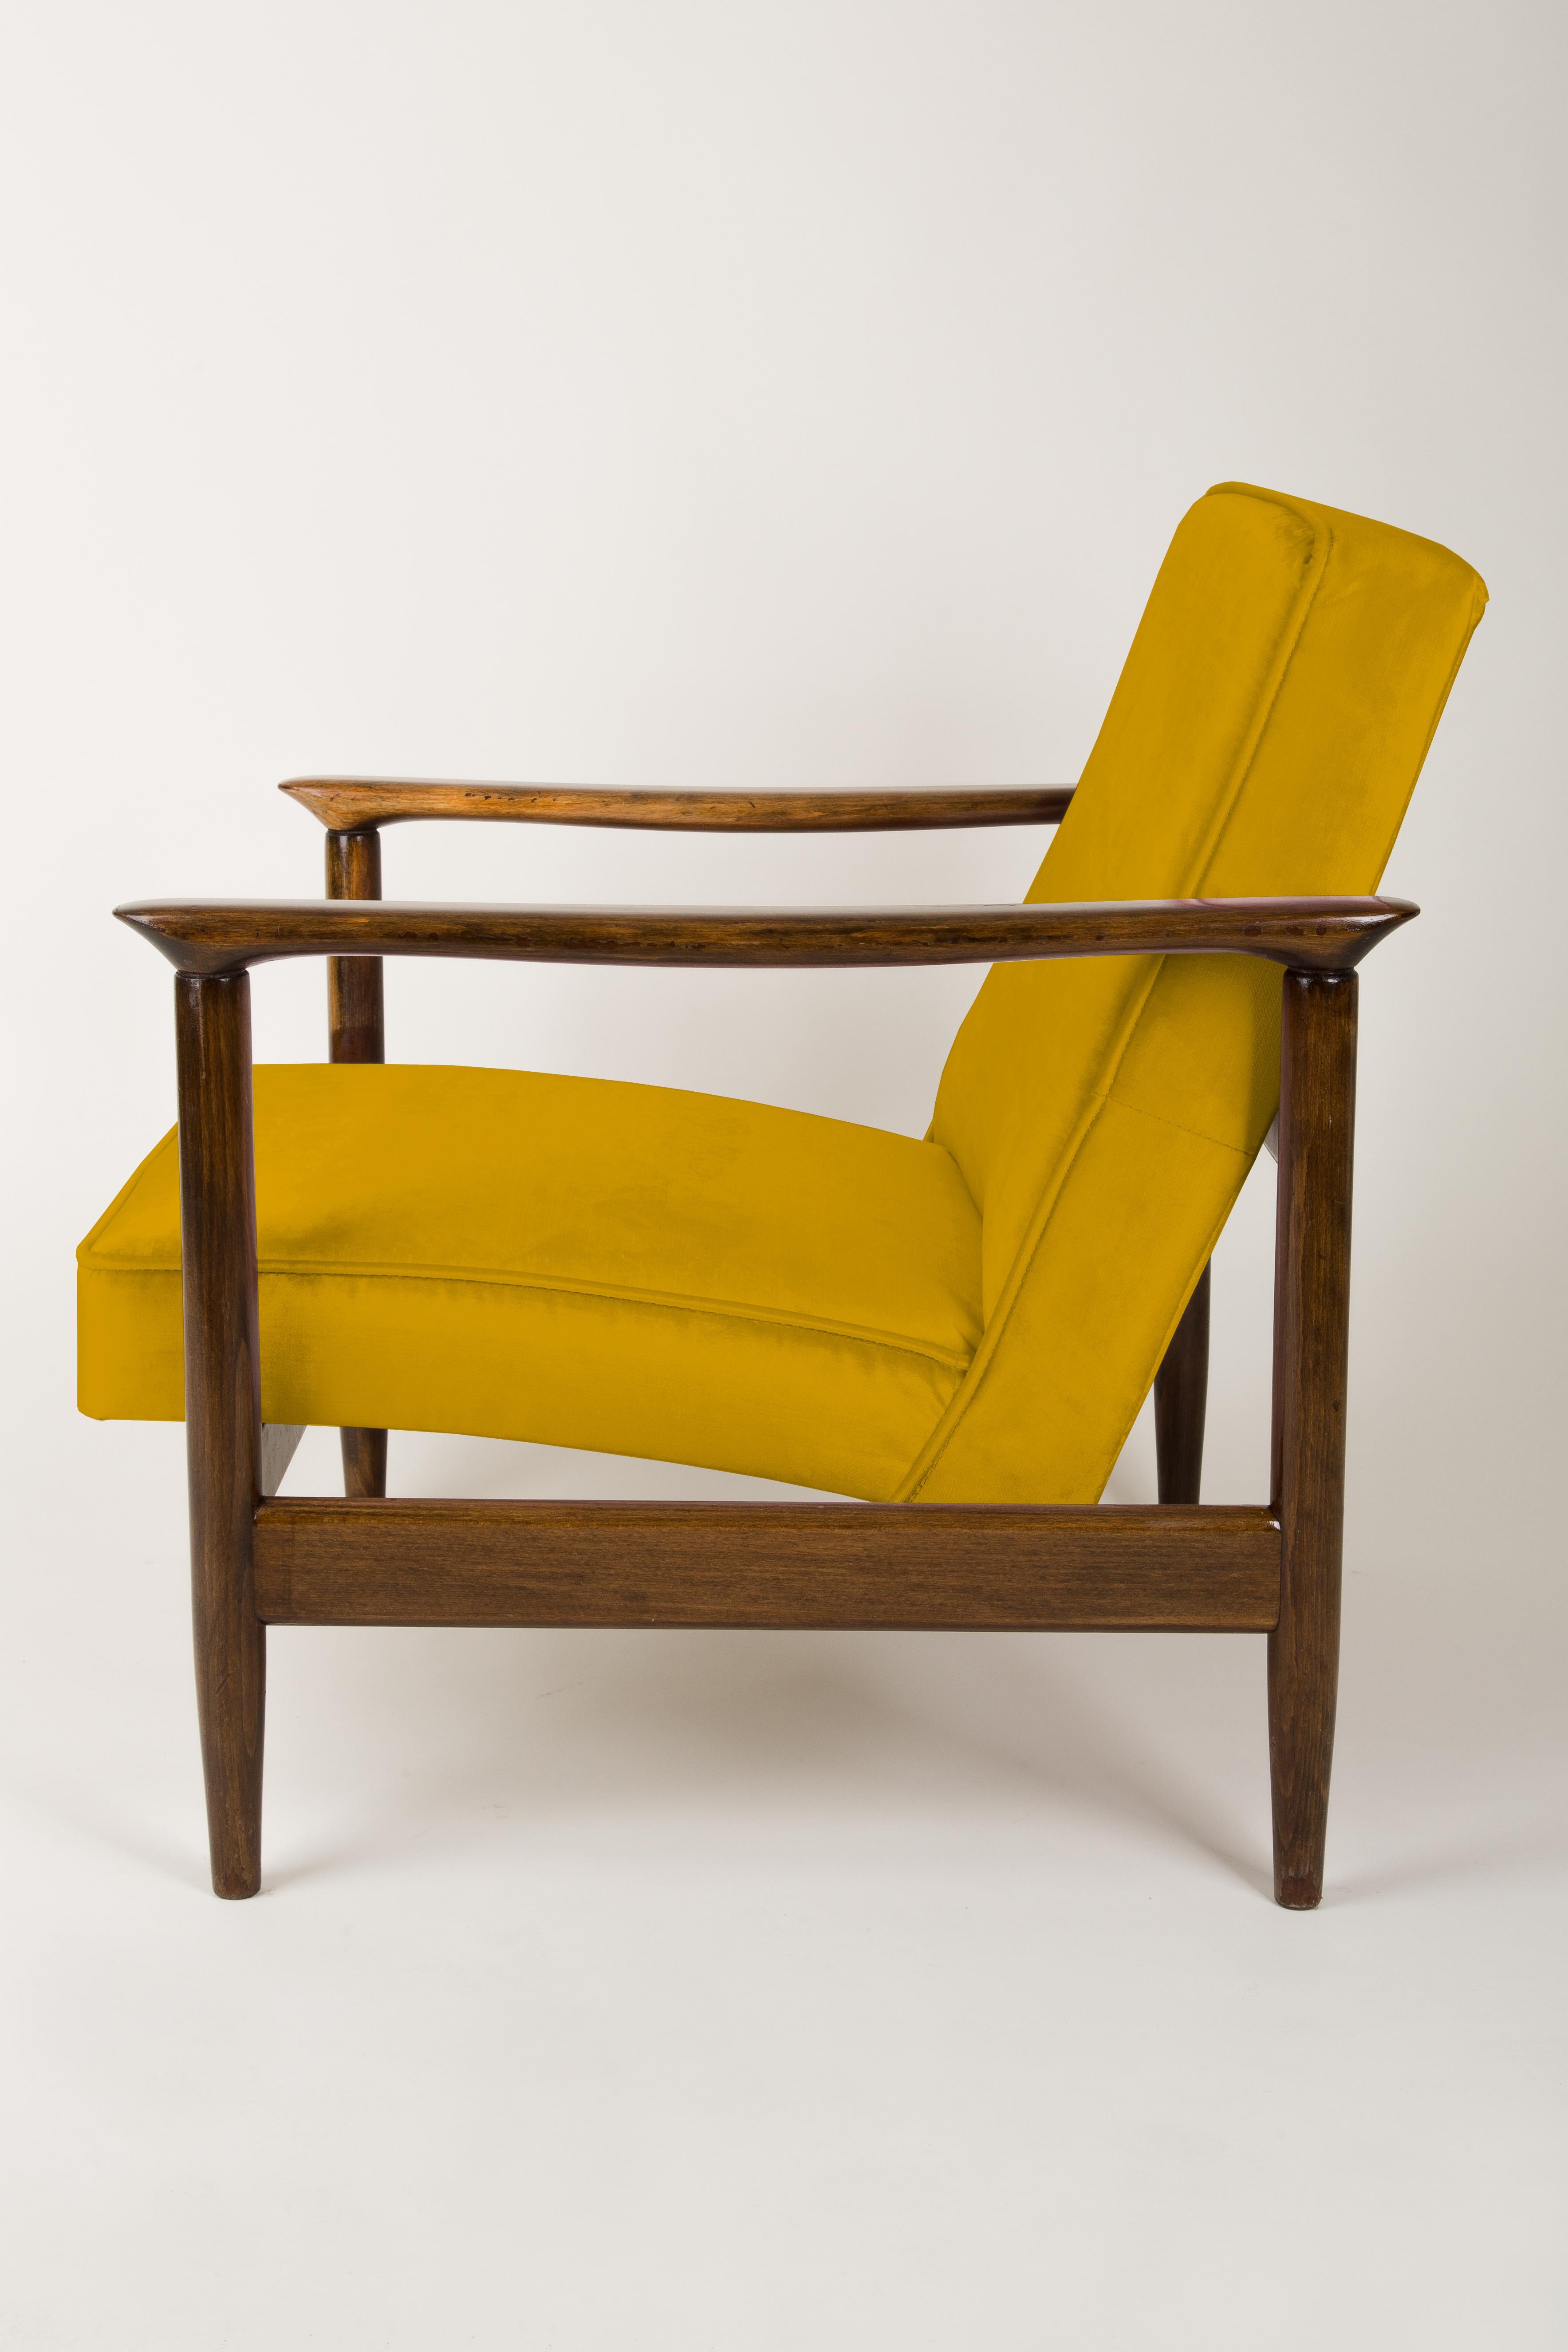 20th Century Pair of Yellow Armchairs, Edmund Homa, GFM-142, 1960s, Poland For Sale